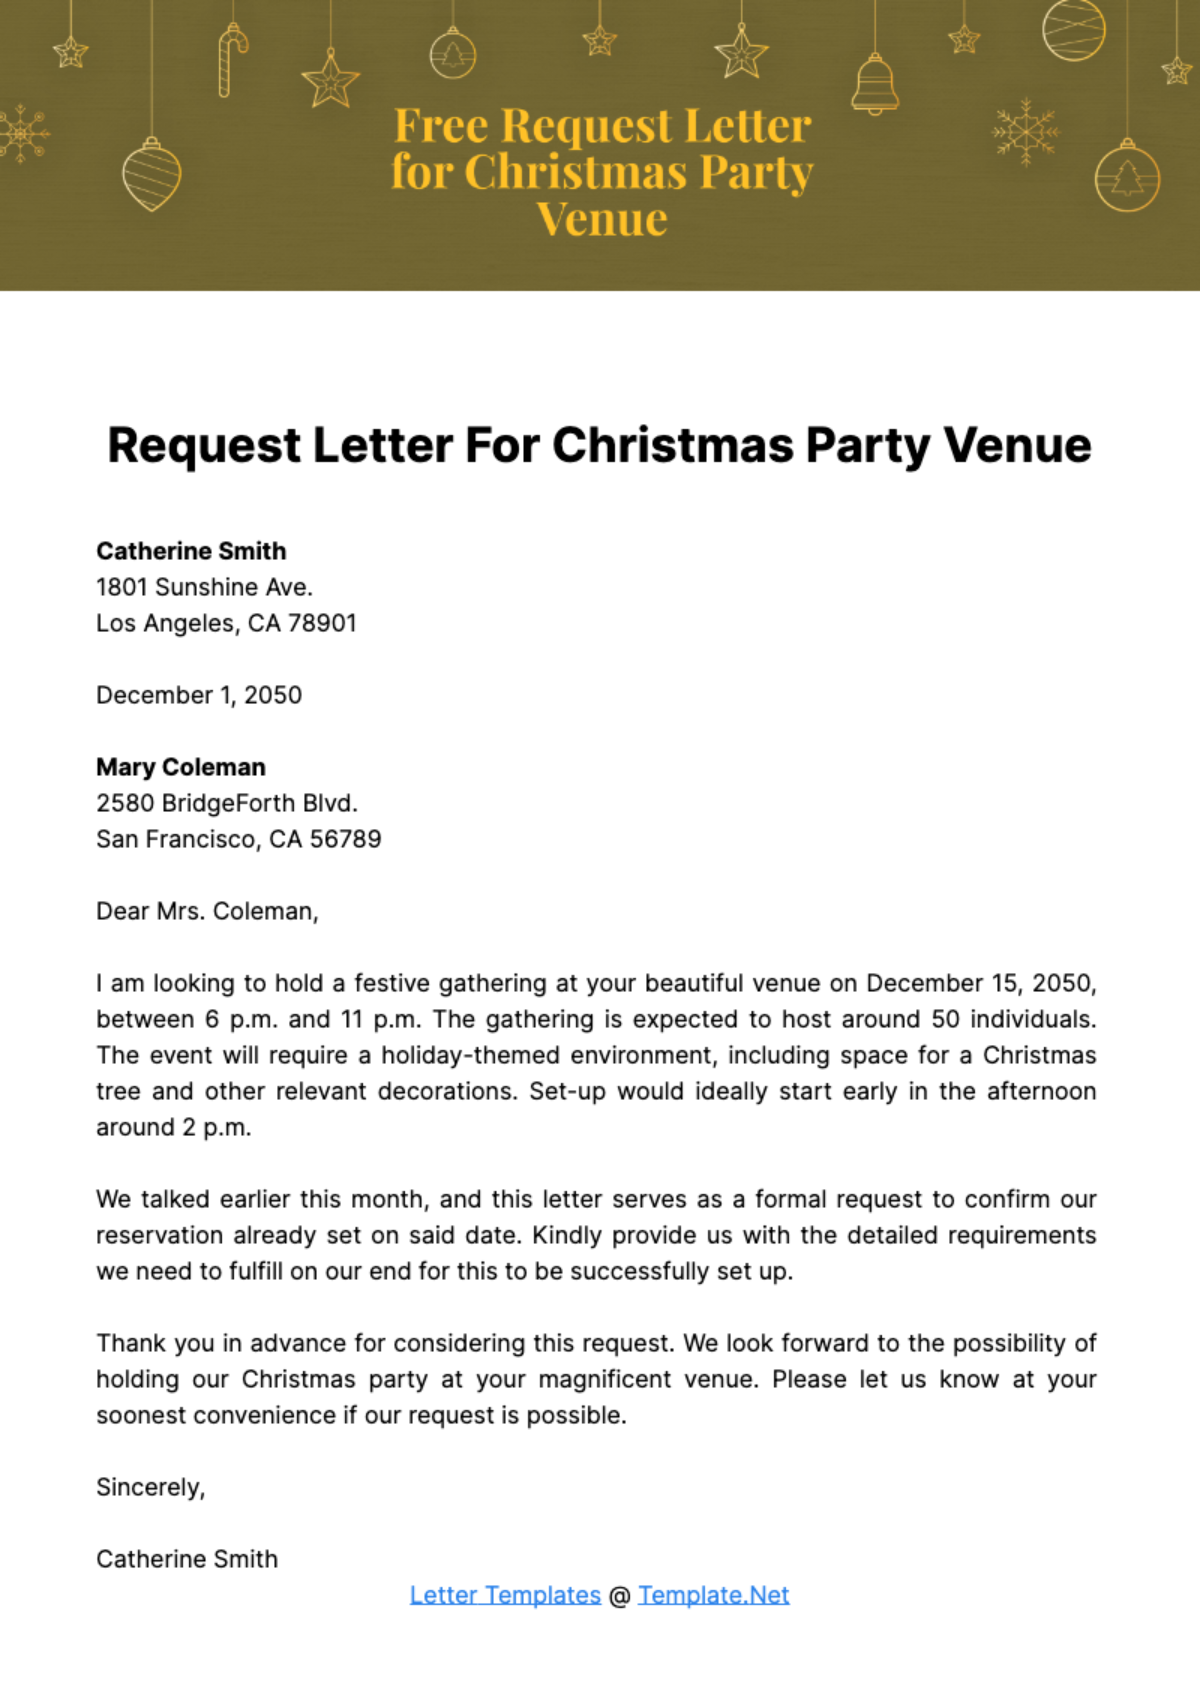 Request Letter for Christmas Party Venue Template